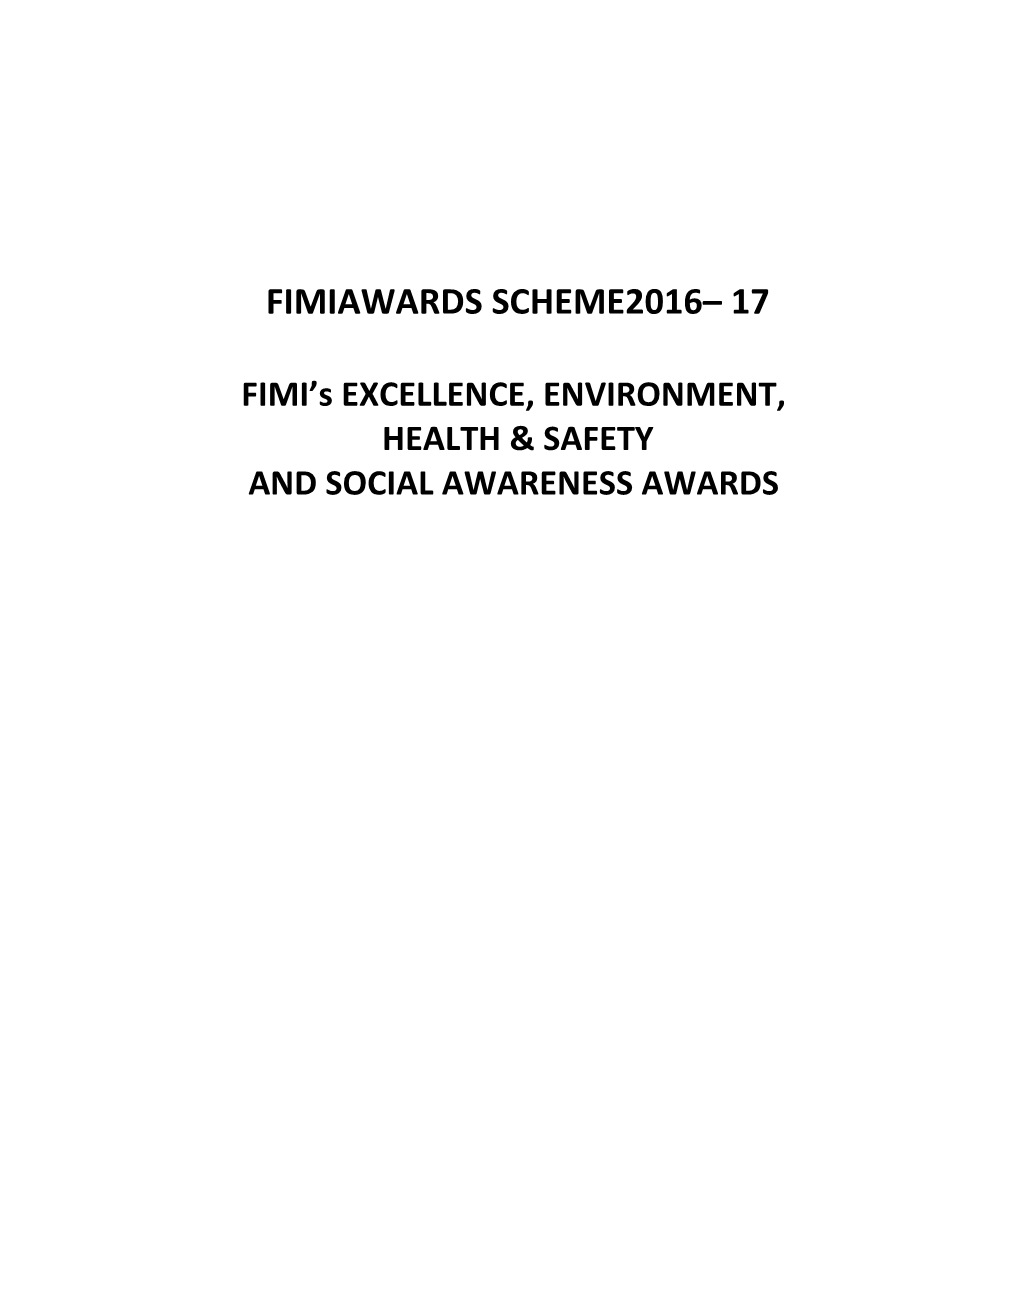 FIMI S EXCELLENCE, ENVIRONMENT